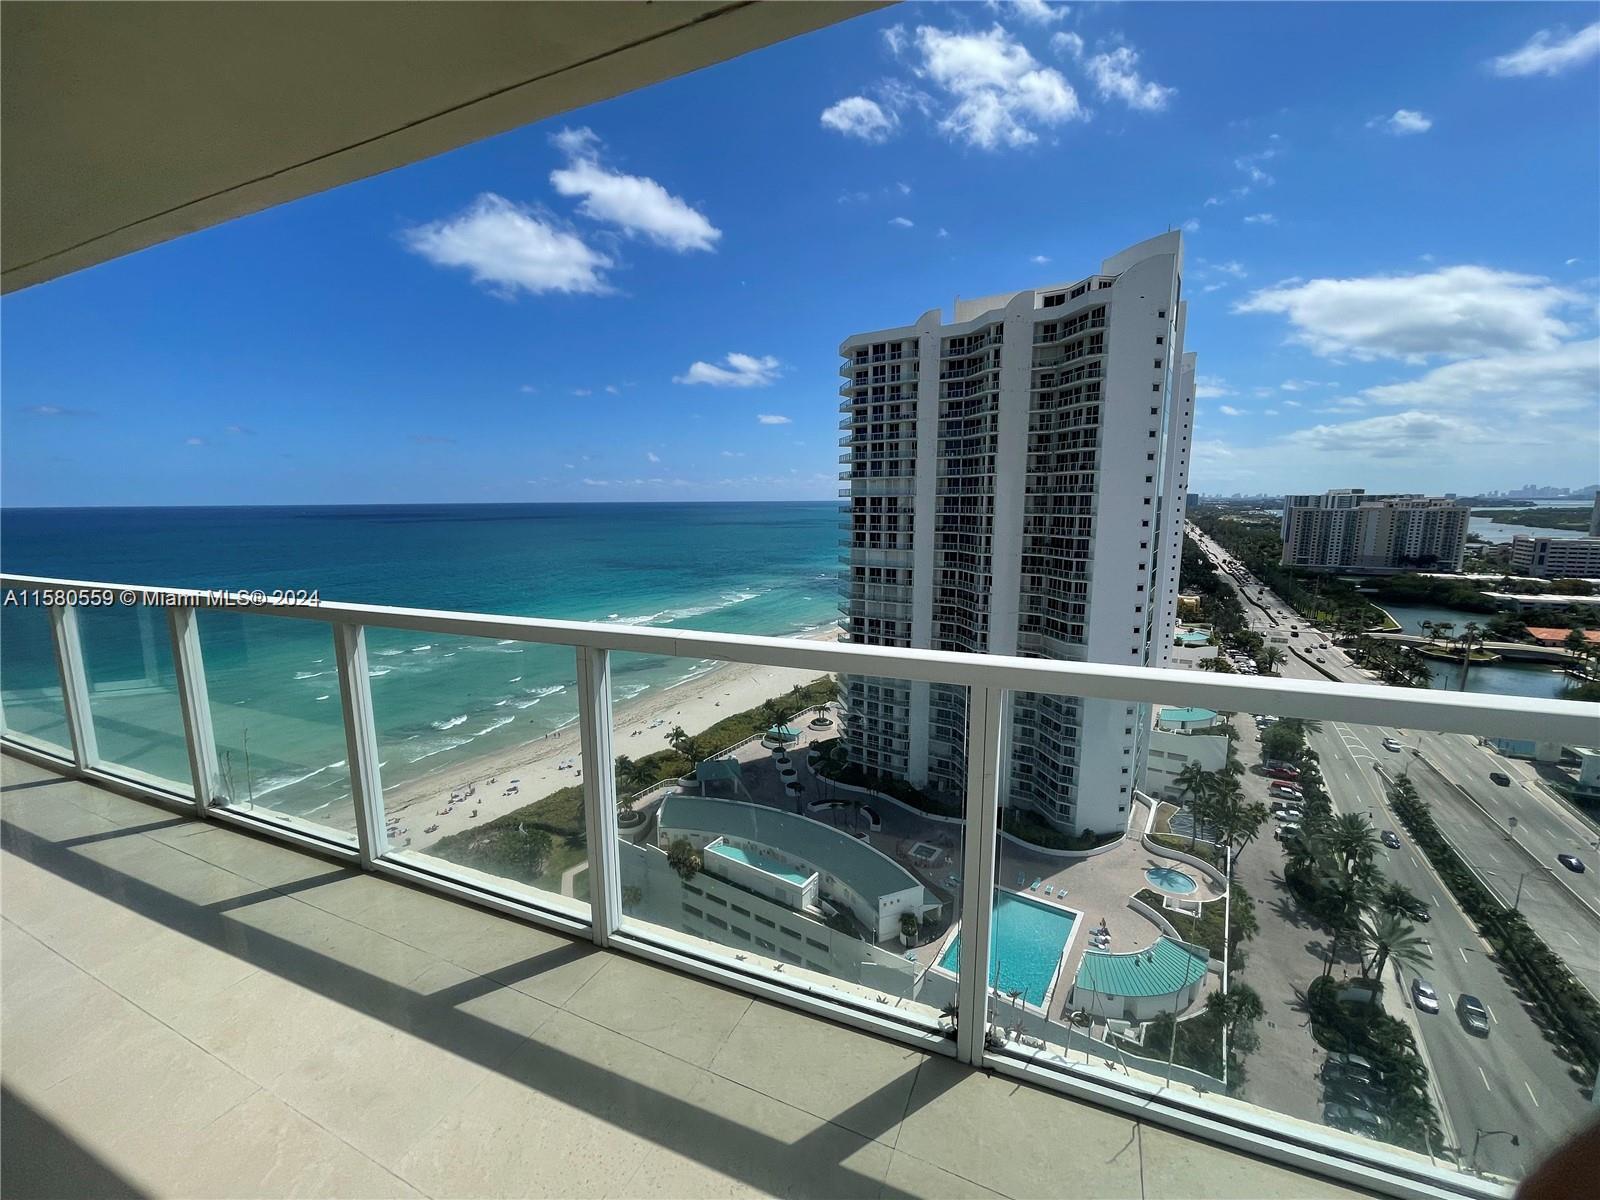 BEAUTIFUL BEACH CONDO! COMPLETELY RENOVATED! CORNER UNIT, WRAPAROUND BALCONY! 2 BEDROOMS AND 2 BATHS! AVAILABLE TO MOVE IN RIGHT AWAY! ENJOY ALL FULL AMENITIES, FULL BEACH SERVICE, VALET PARKING SERVICE, INCLUDED! BEST LINE IN THE BUILDING! AVAILABLE FOR ANNUAL LEASE UNFURNISHED!